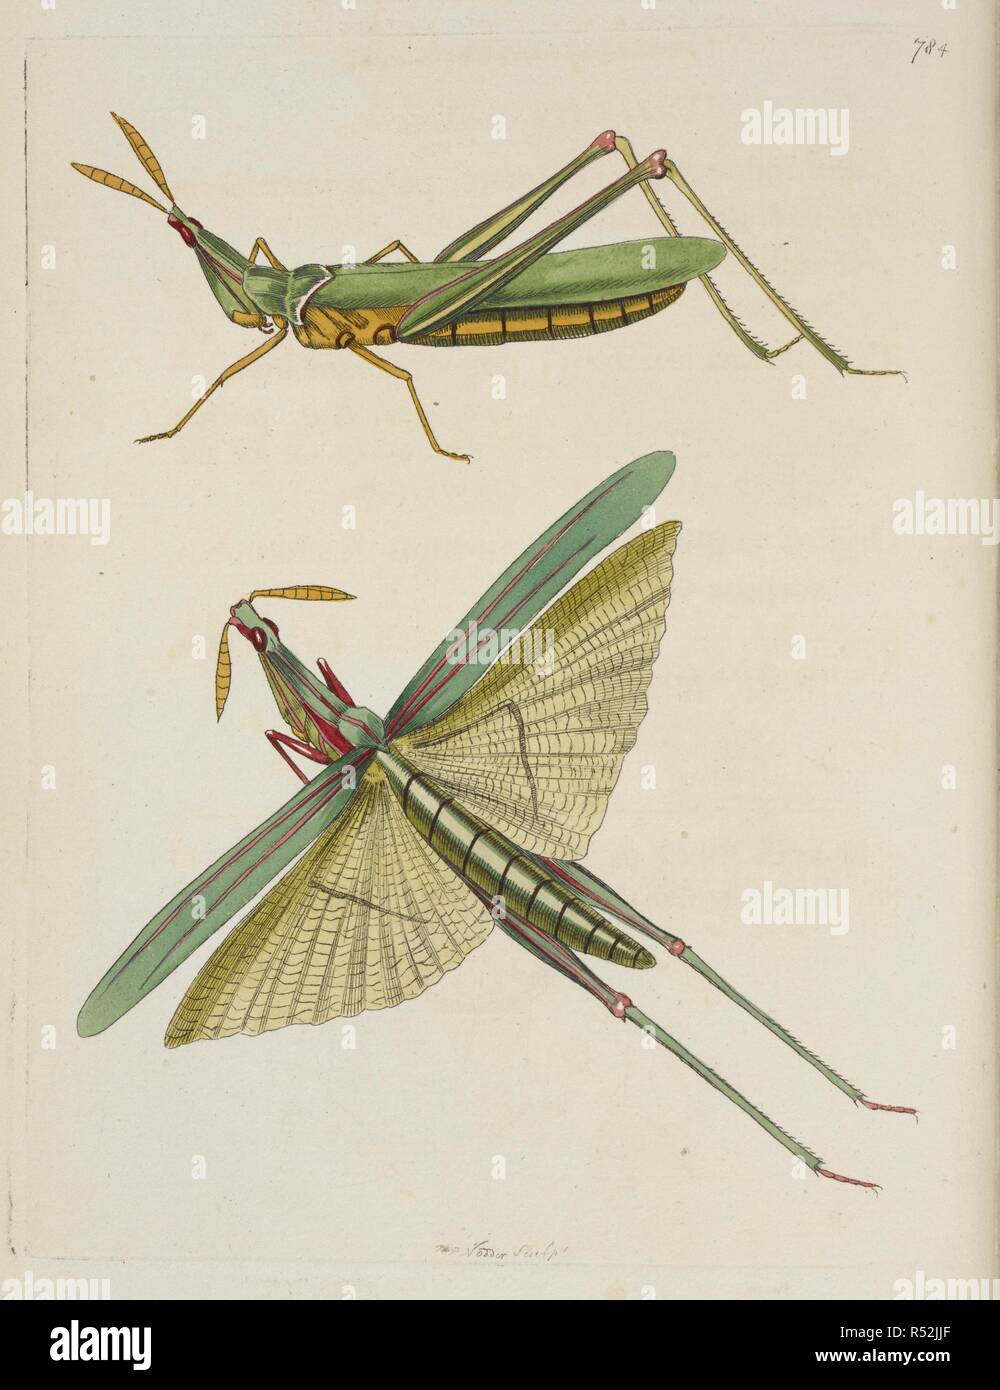 Gryllus Nasutus. Long-headed African locust, Acrida nasuta (Long-fronted locust, Gryllus nasutus.) . Vivarium Naturae sive rerum naturalium ... icones ad ipsam naturam depictae et descriptÃ¦.-The Naturalists' Miscellany, or coloured figures of natural objects drawn and described ... from nature. London : Nodder & Co., 1789-1813. Source: 45.b.3 plate 784. Author: SHAW GEORGE. Nodder, Frederick Polydore. Stock Photo